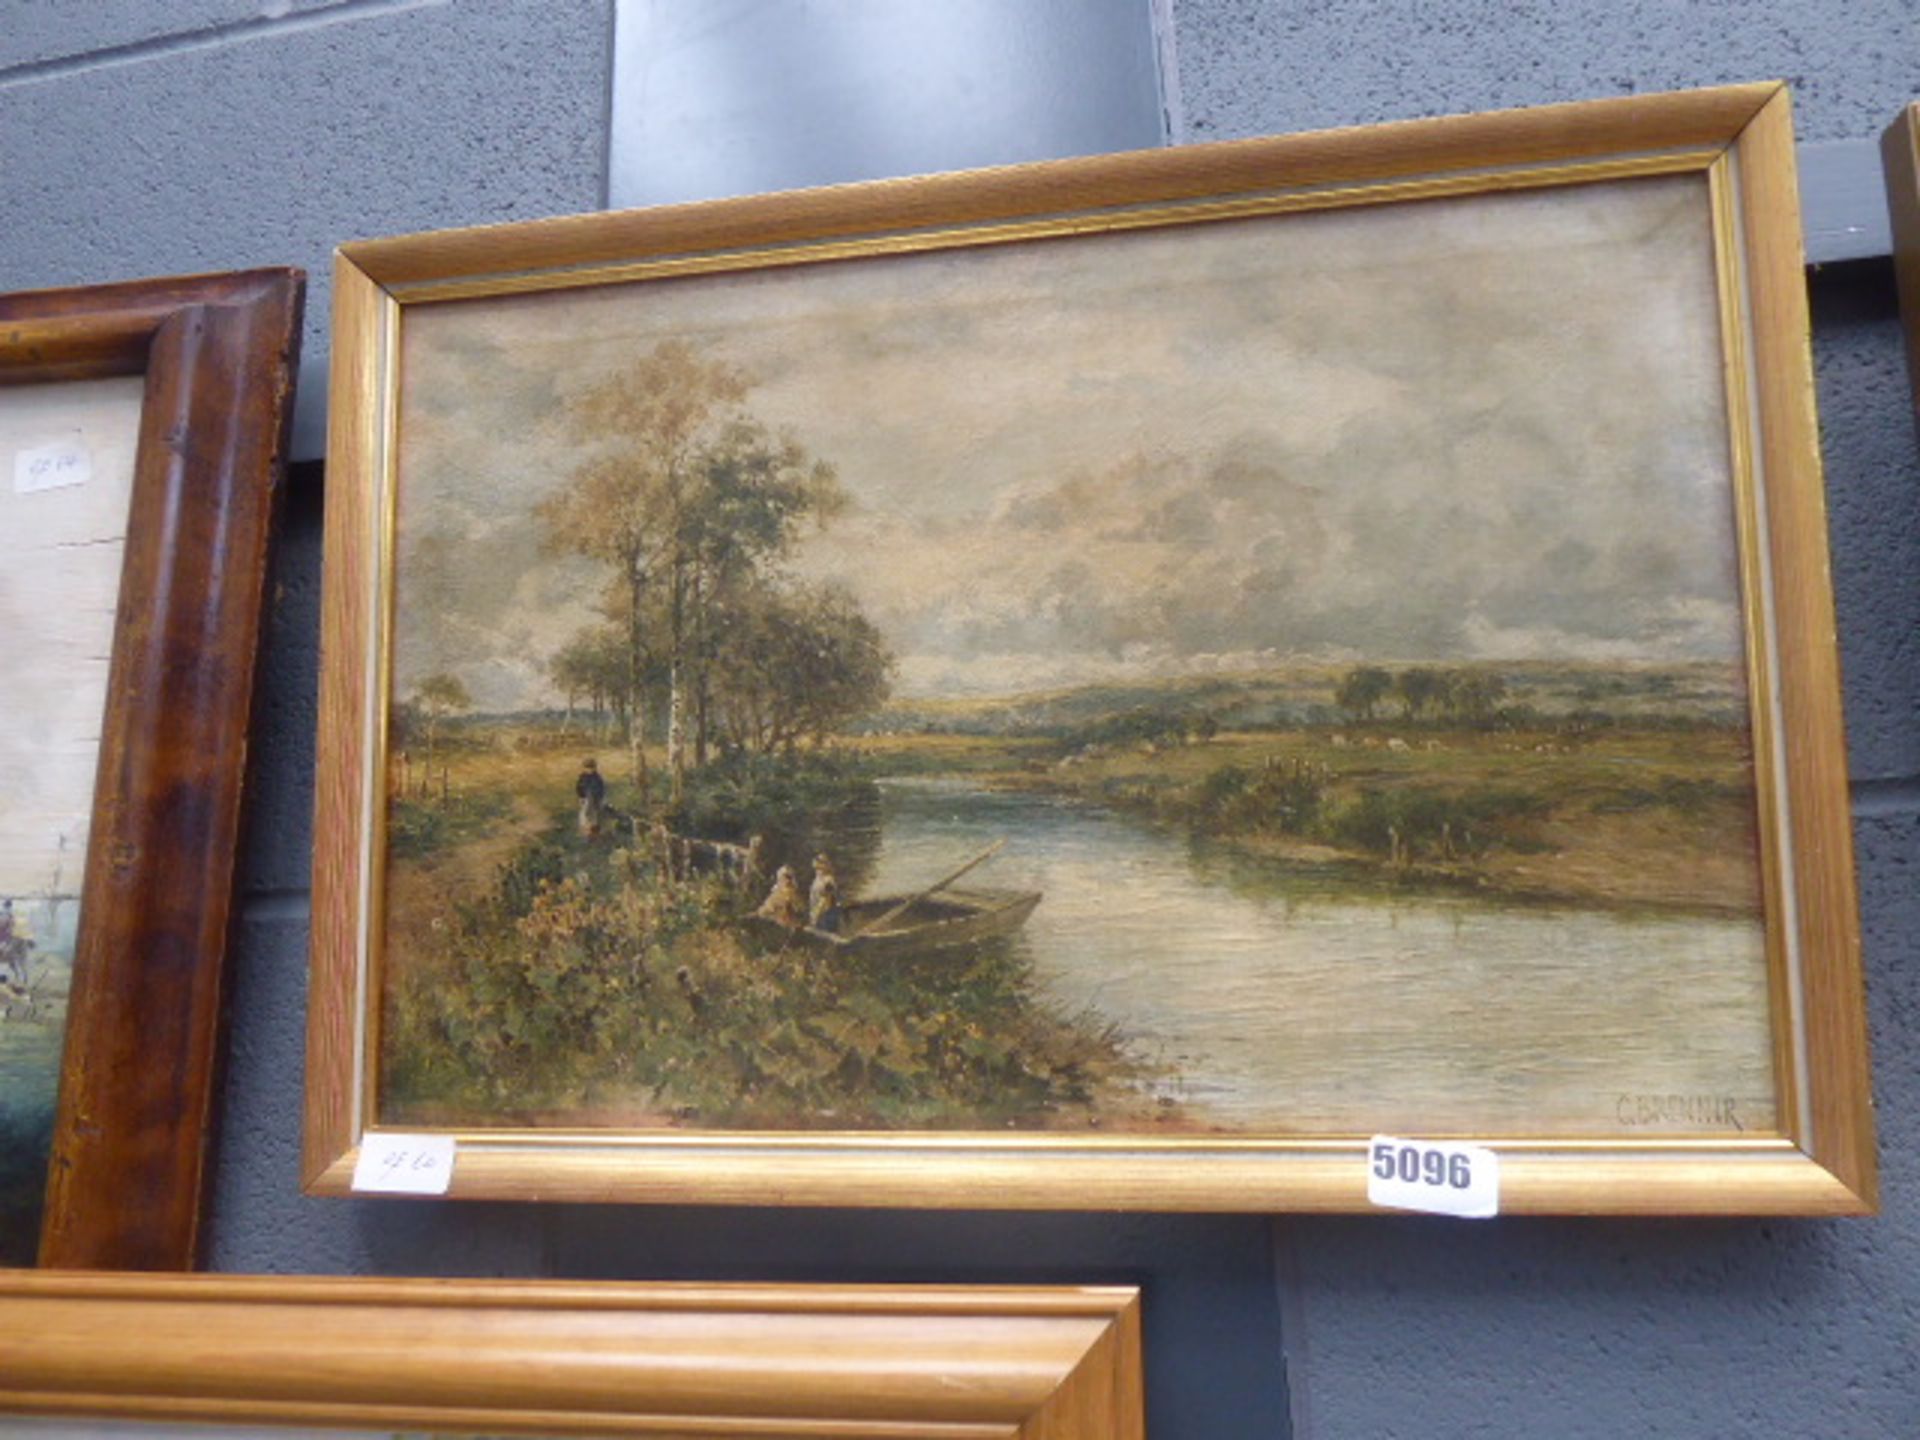 Framed and glazed textured print on canvas of a river scene with a couple in a boat and cattle in